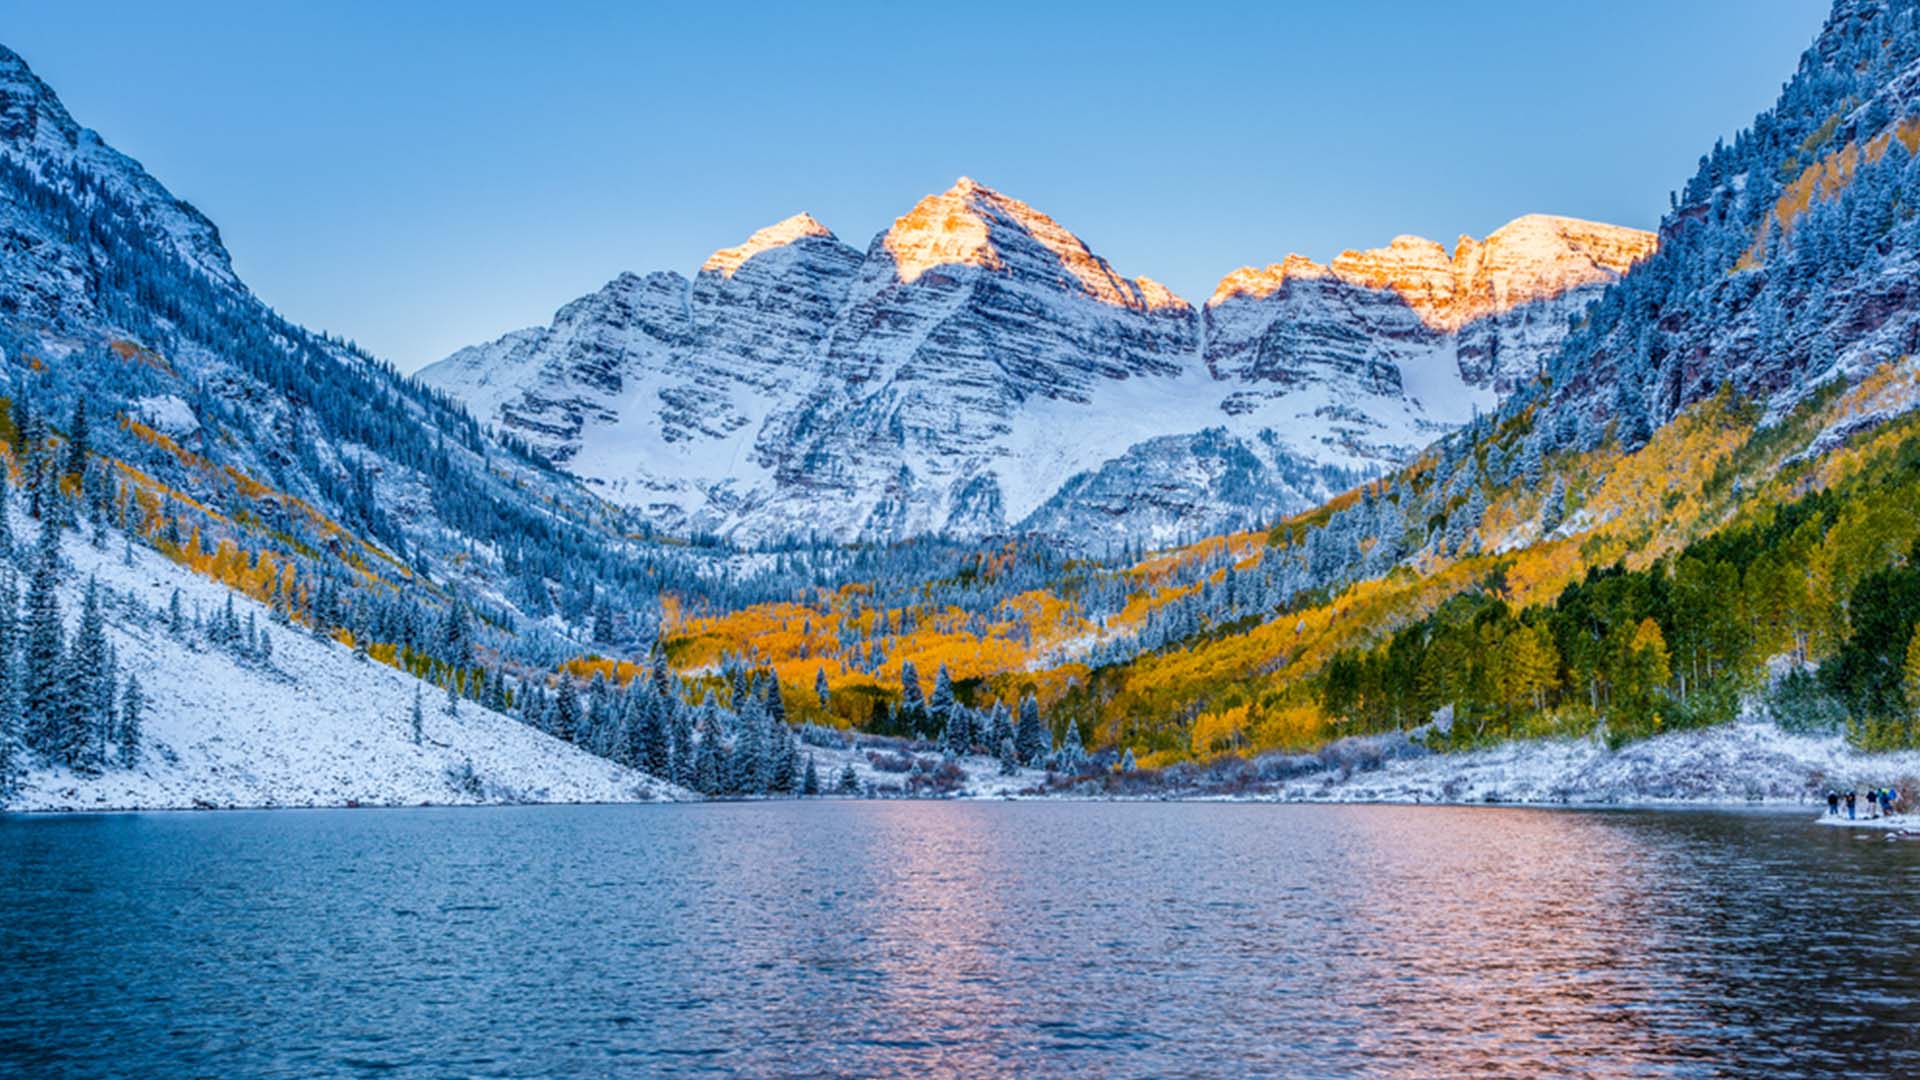 All About the Rocky Mountains National Park - TOMORROW\'S WORLD TODAY®